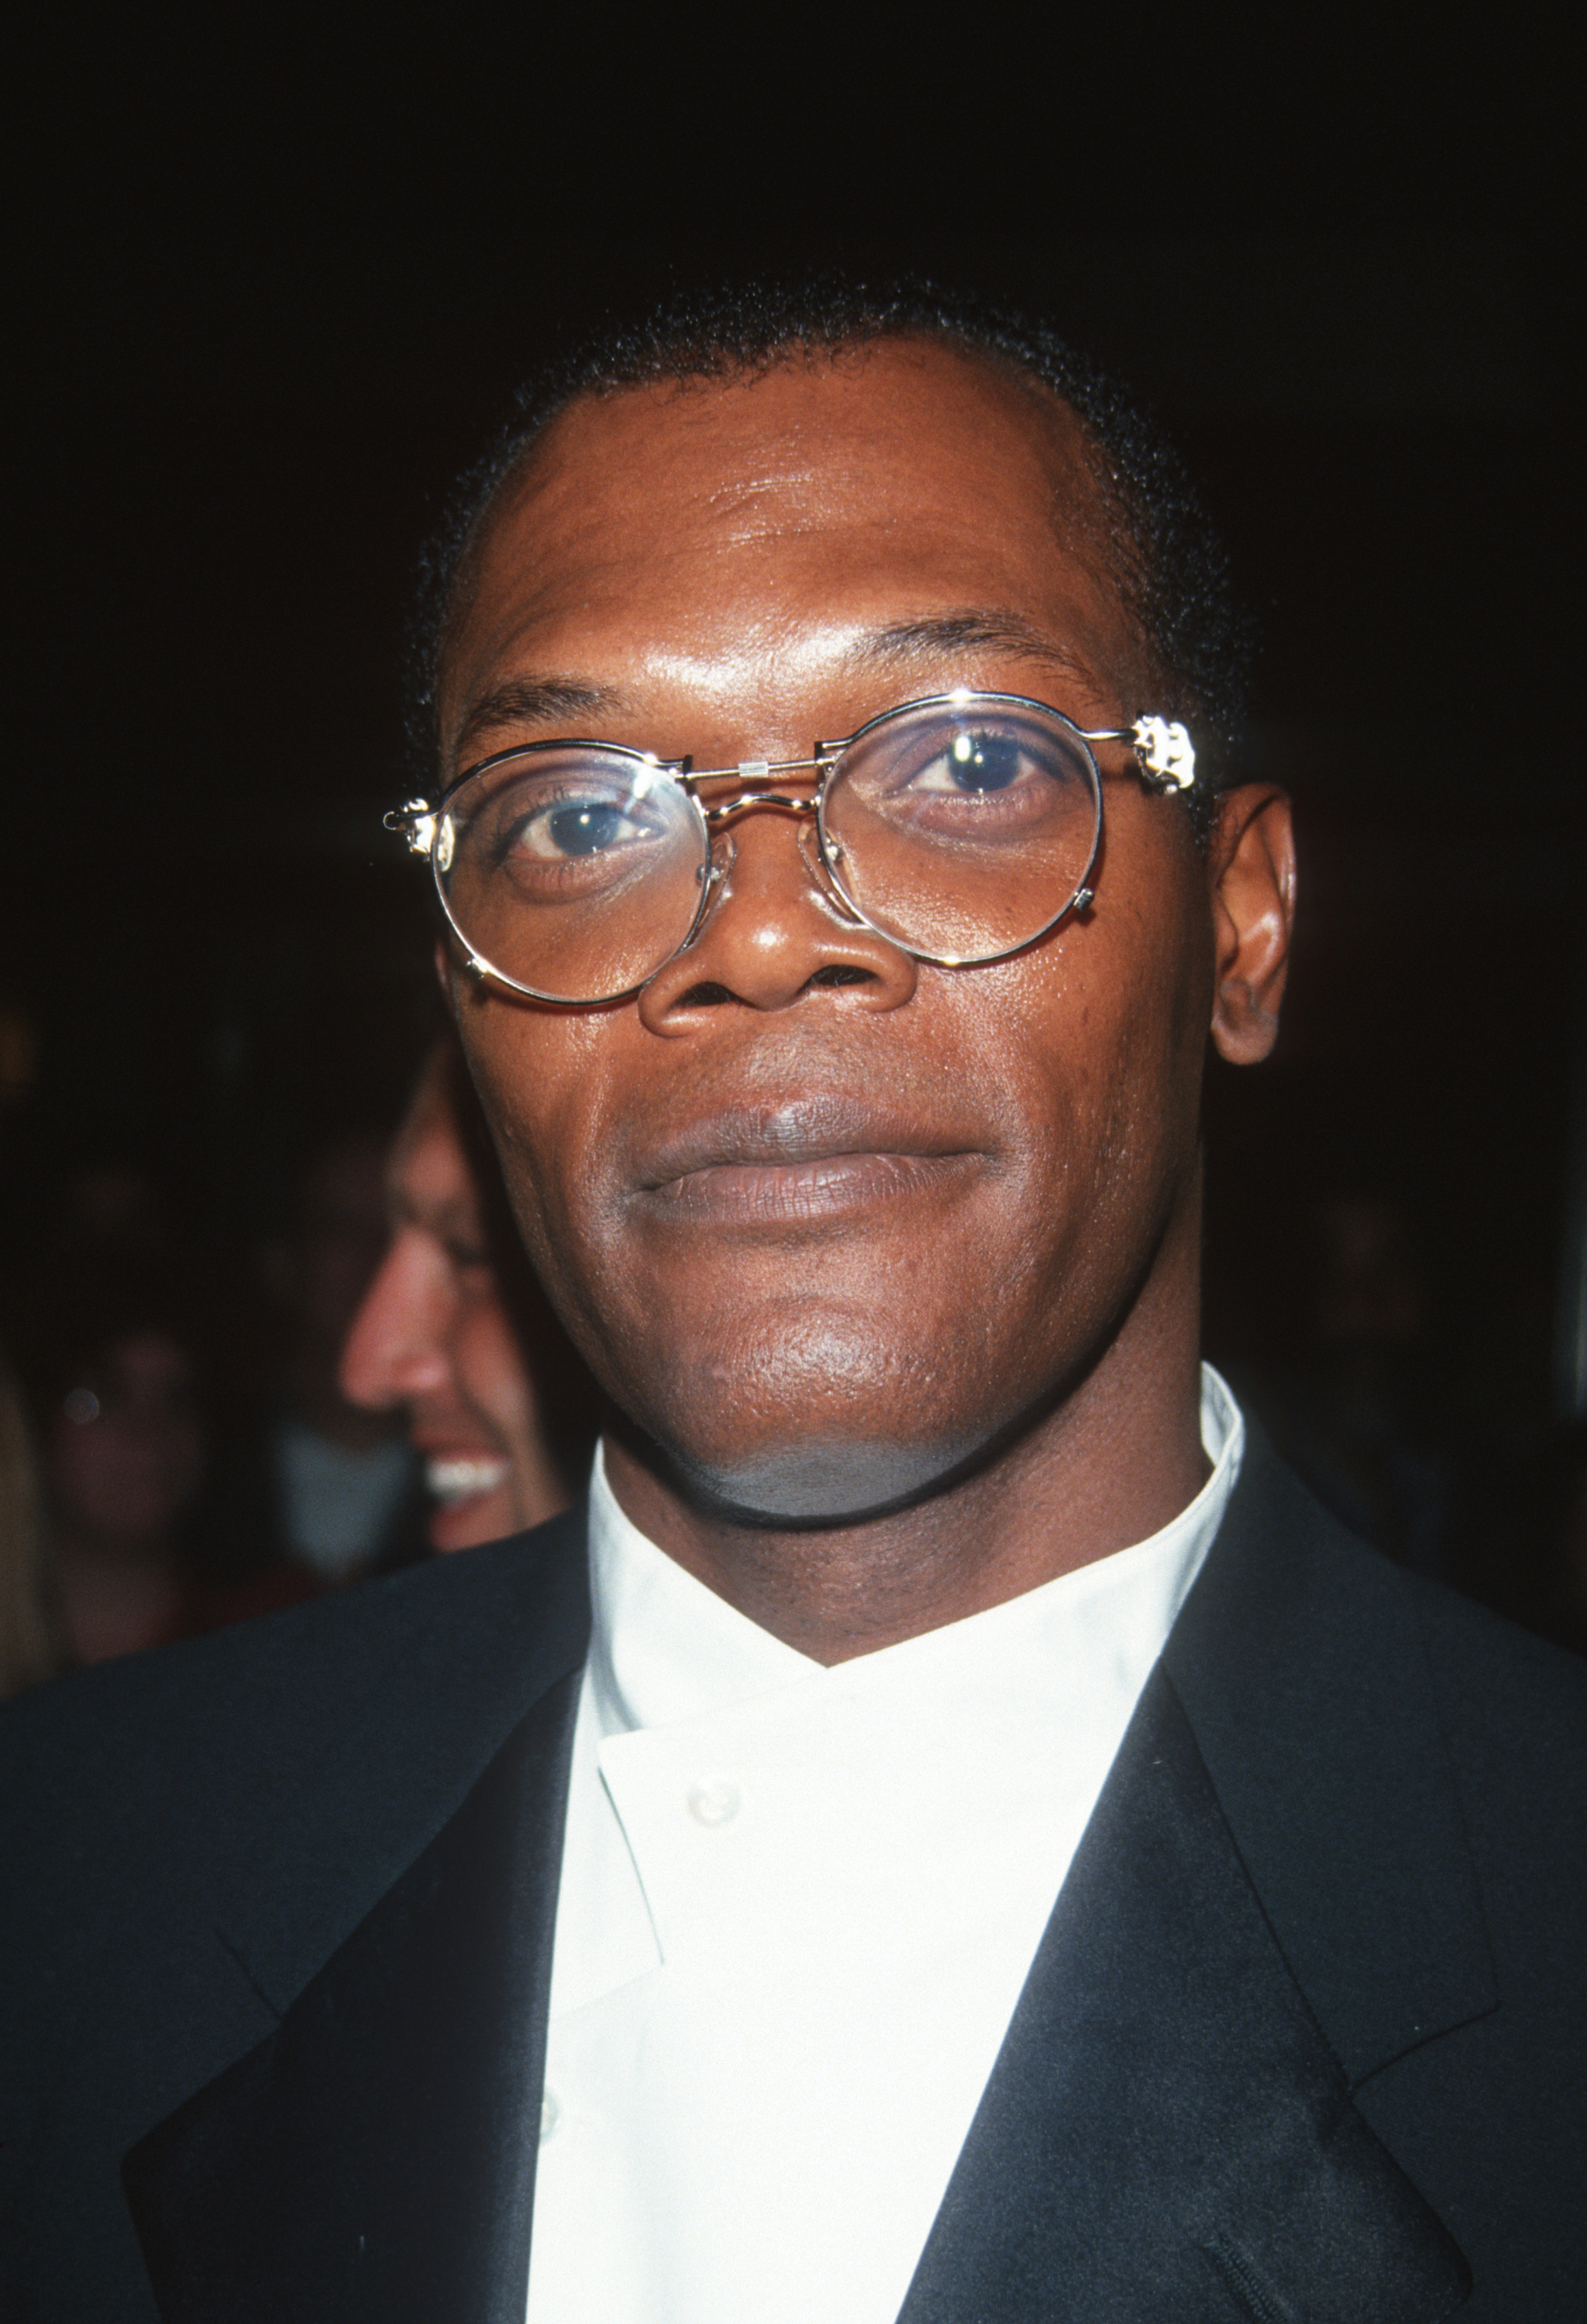 Samuel L. Jackson wearing glasses and a classic black suit with a white shirt